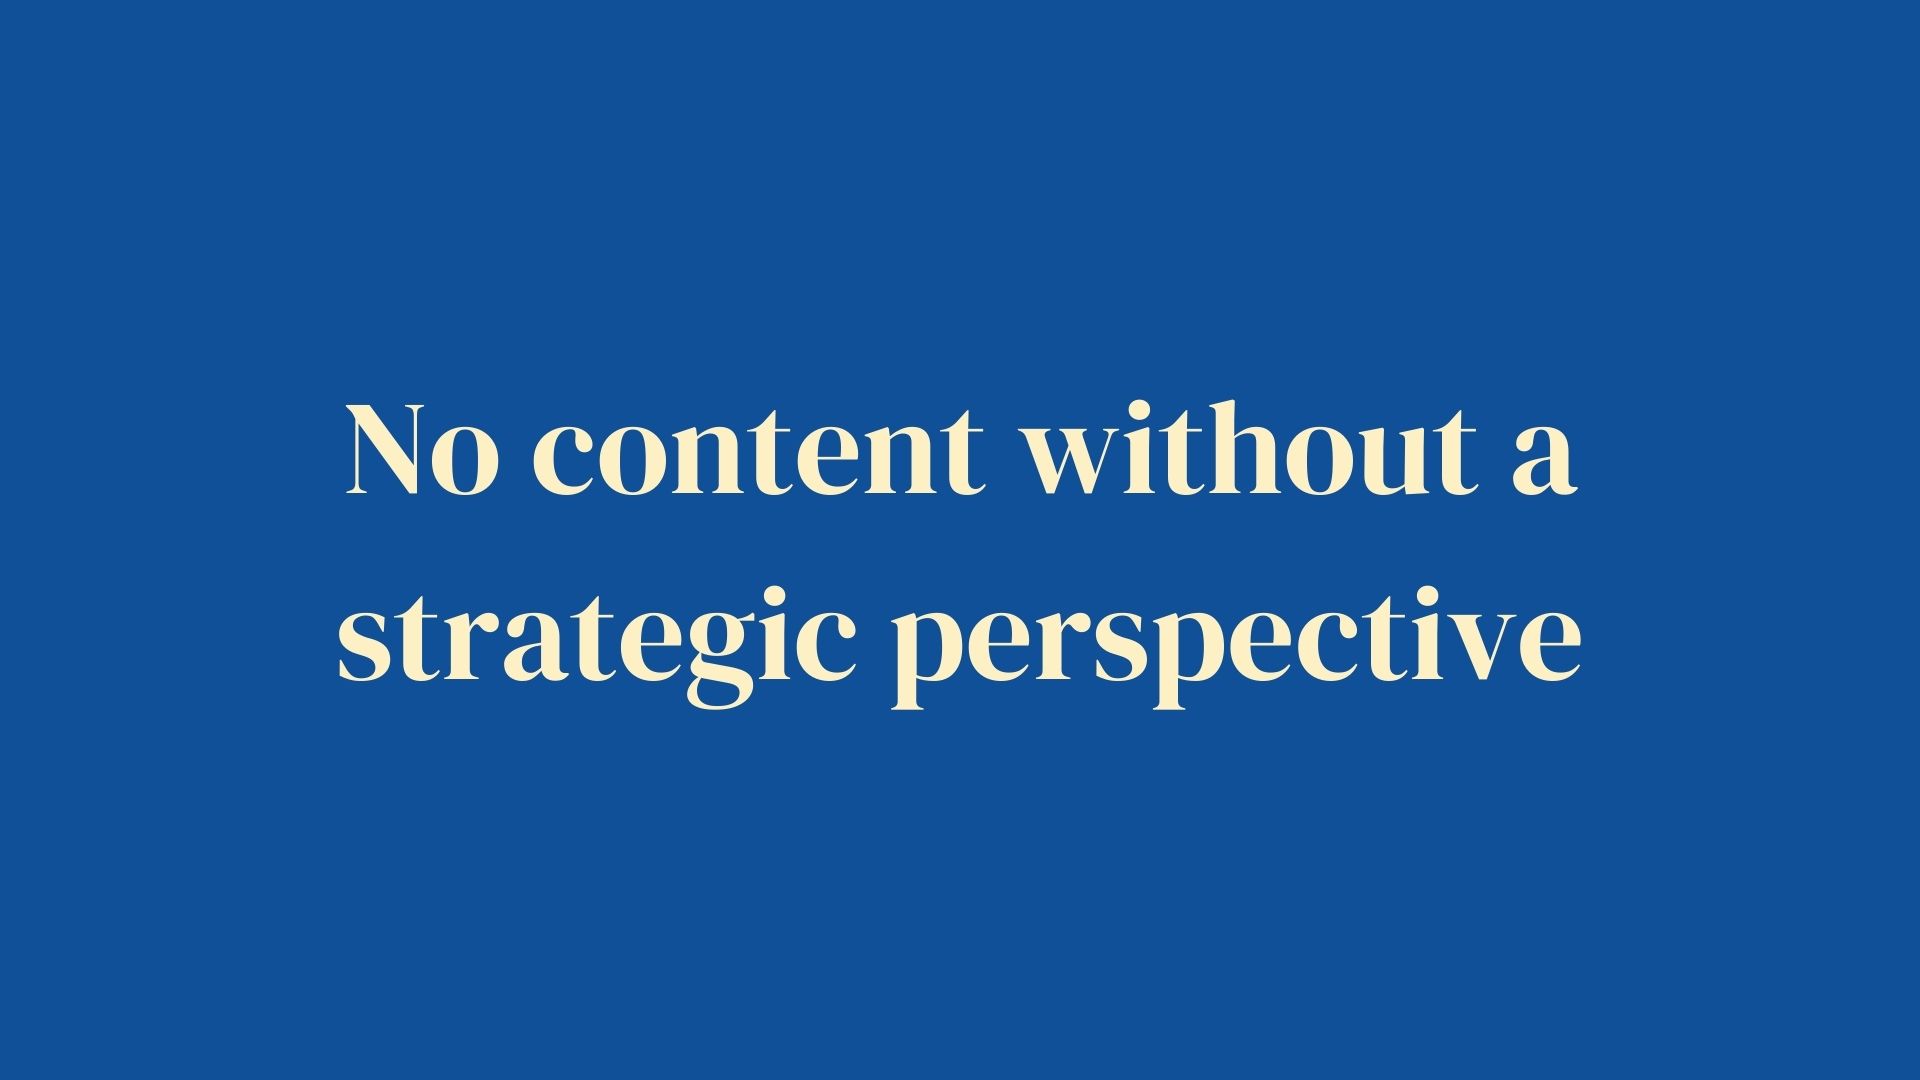 no content without strategic perspective